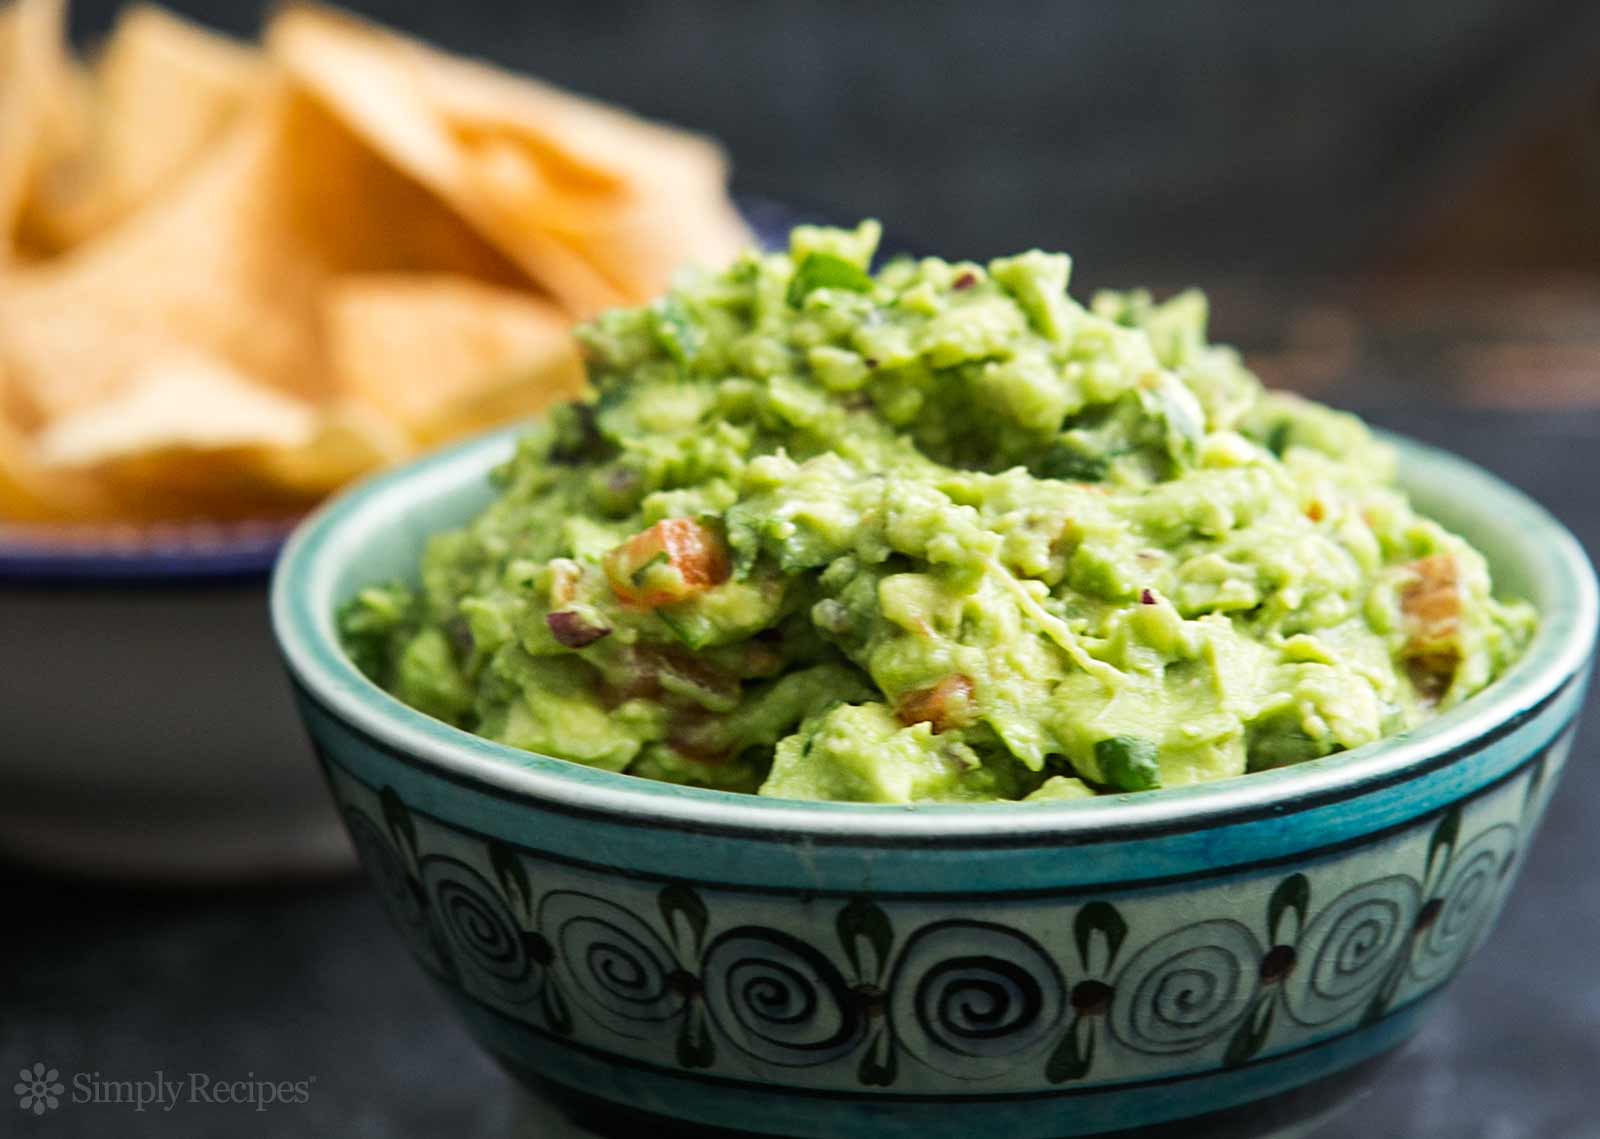 How to Make Guacamole and Know its Health Benefits